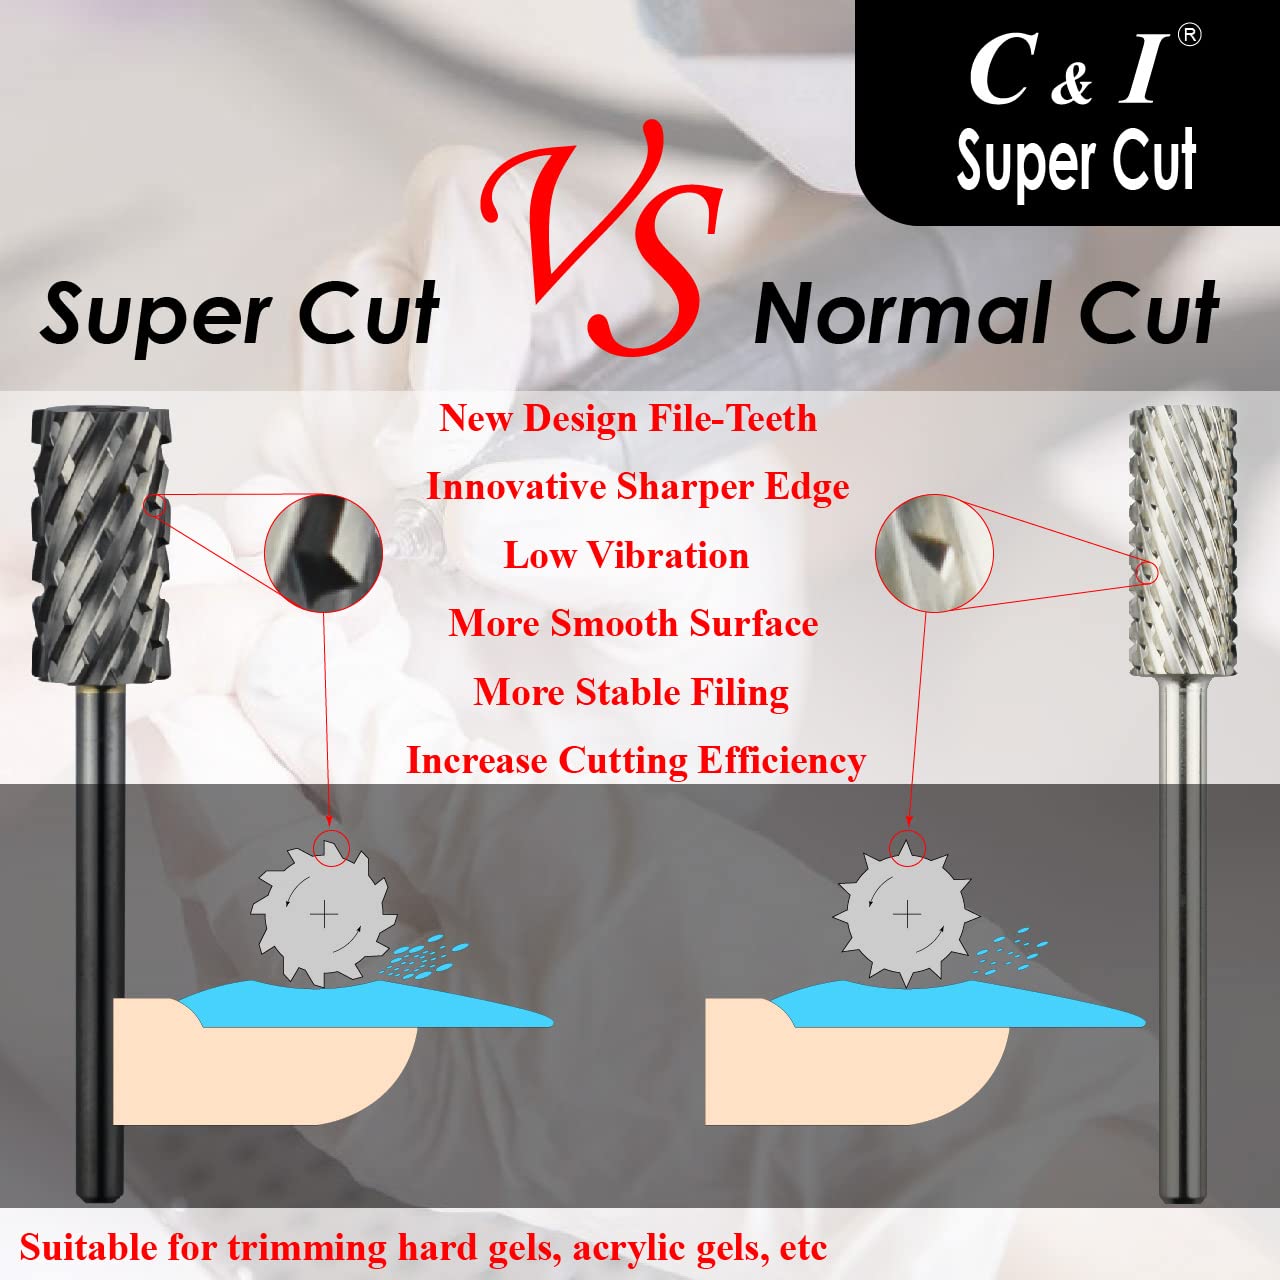 C & I Nail Drill Bit, Super Cut Edition – Upgrade File Teeth, Large Barrel, Professional E File for Electric Nail Drill Machine, Good to Remove Super-Hard Nail Gels (Middle -M)